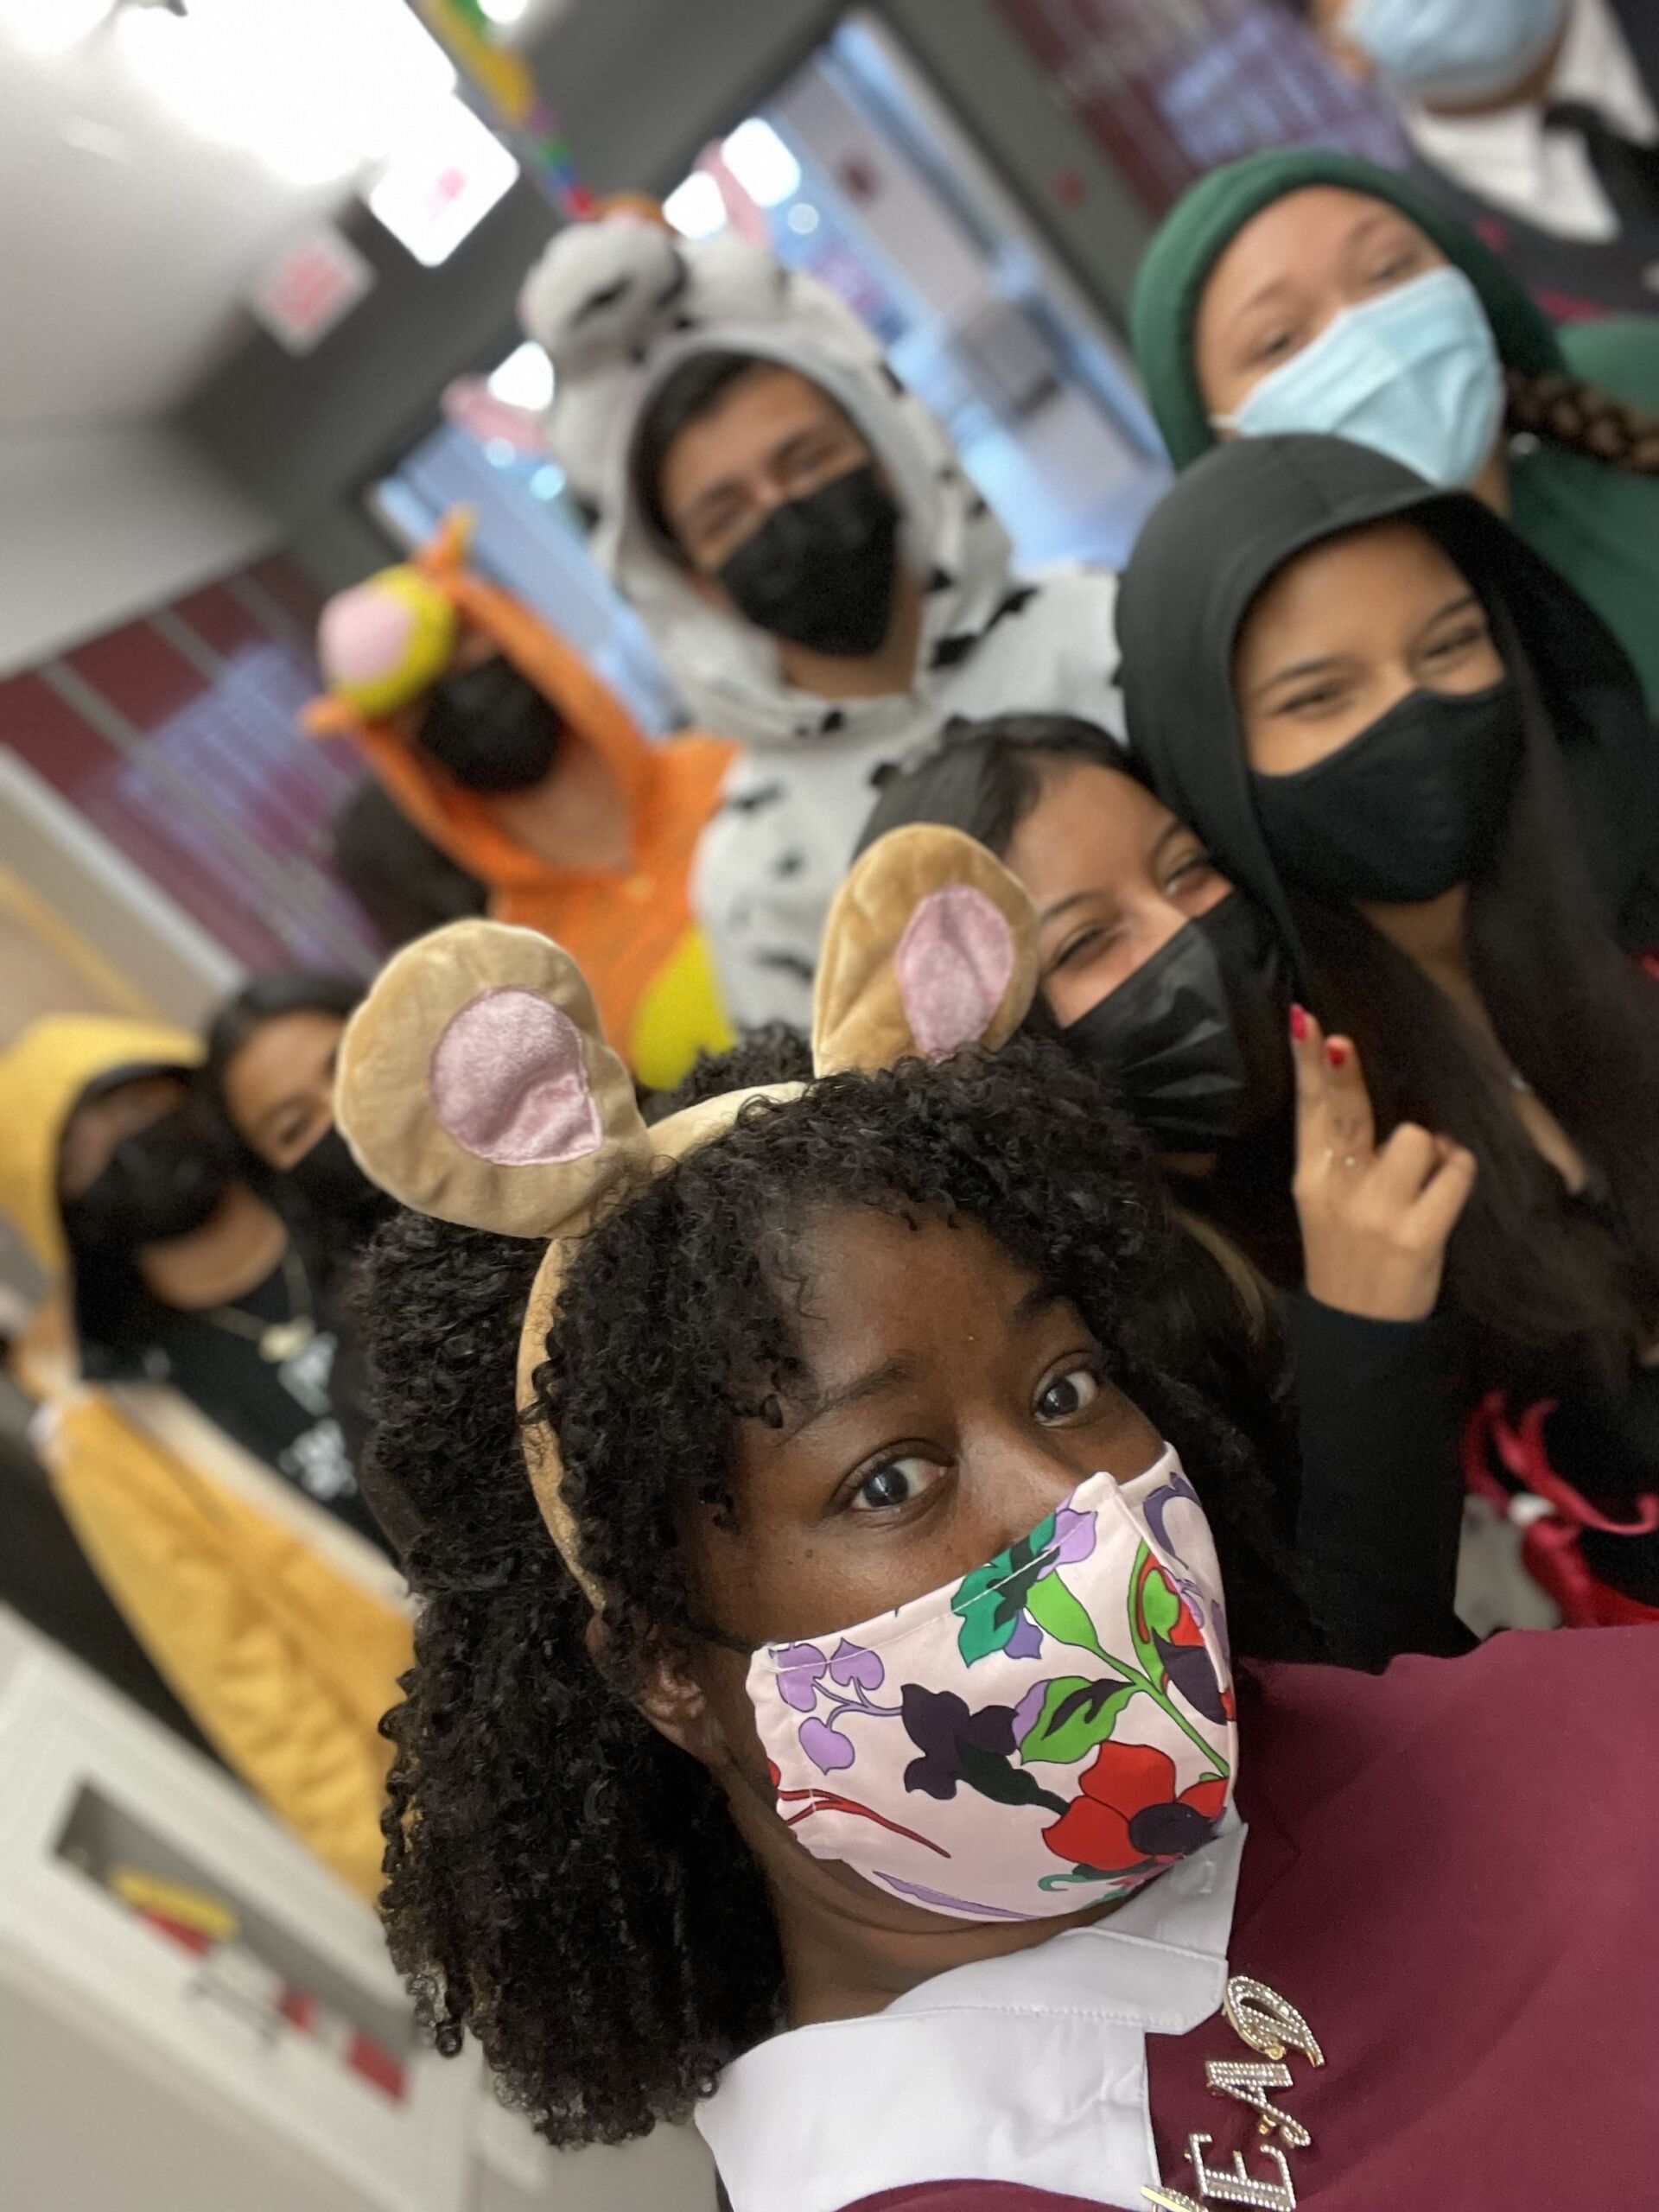 In this photo, you can see Tanisha Hall dressed up as Ms. Read from Arthur with some of her Speer students, some of them also dressed up in costumes, standing behind her. They are all posing for a selfie together in the school hallway.